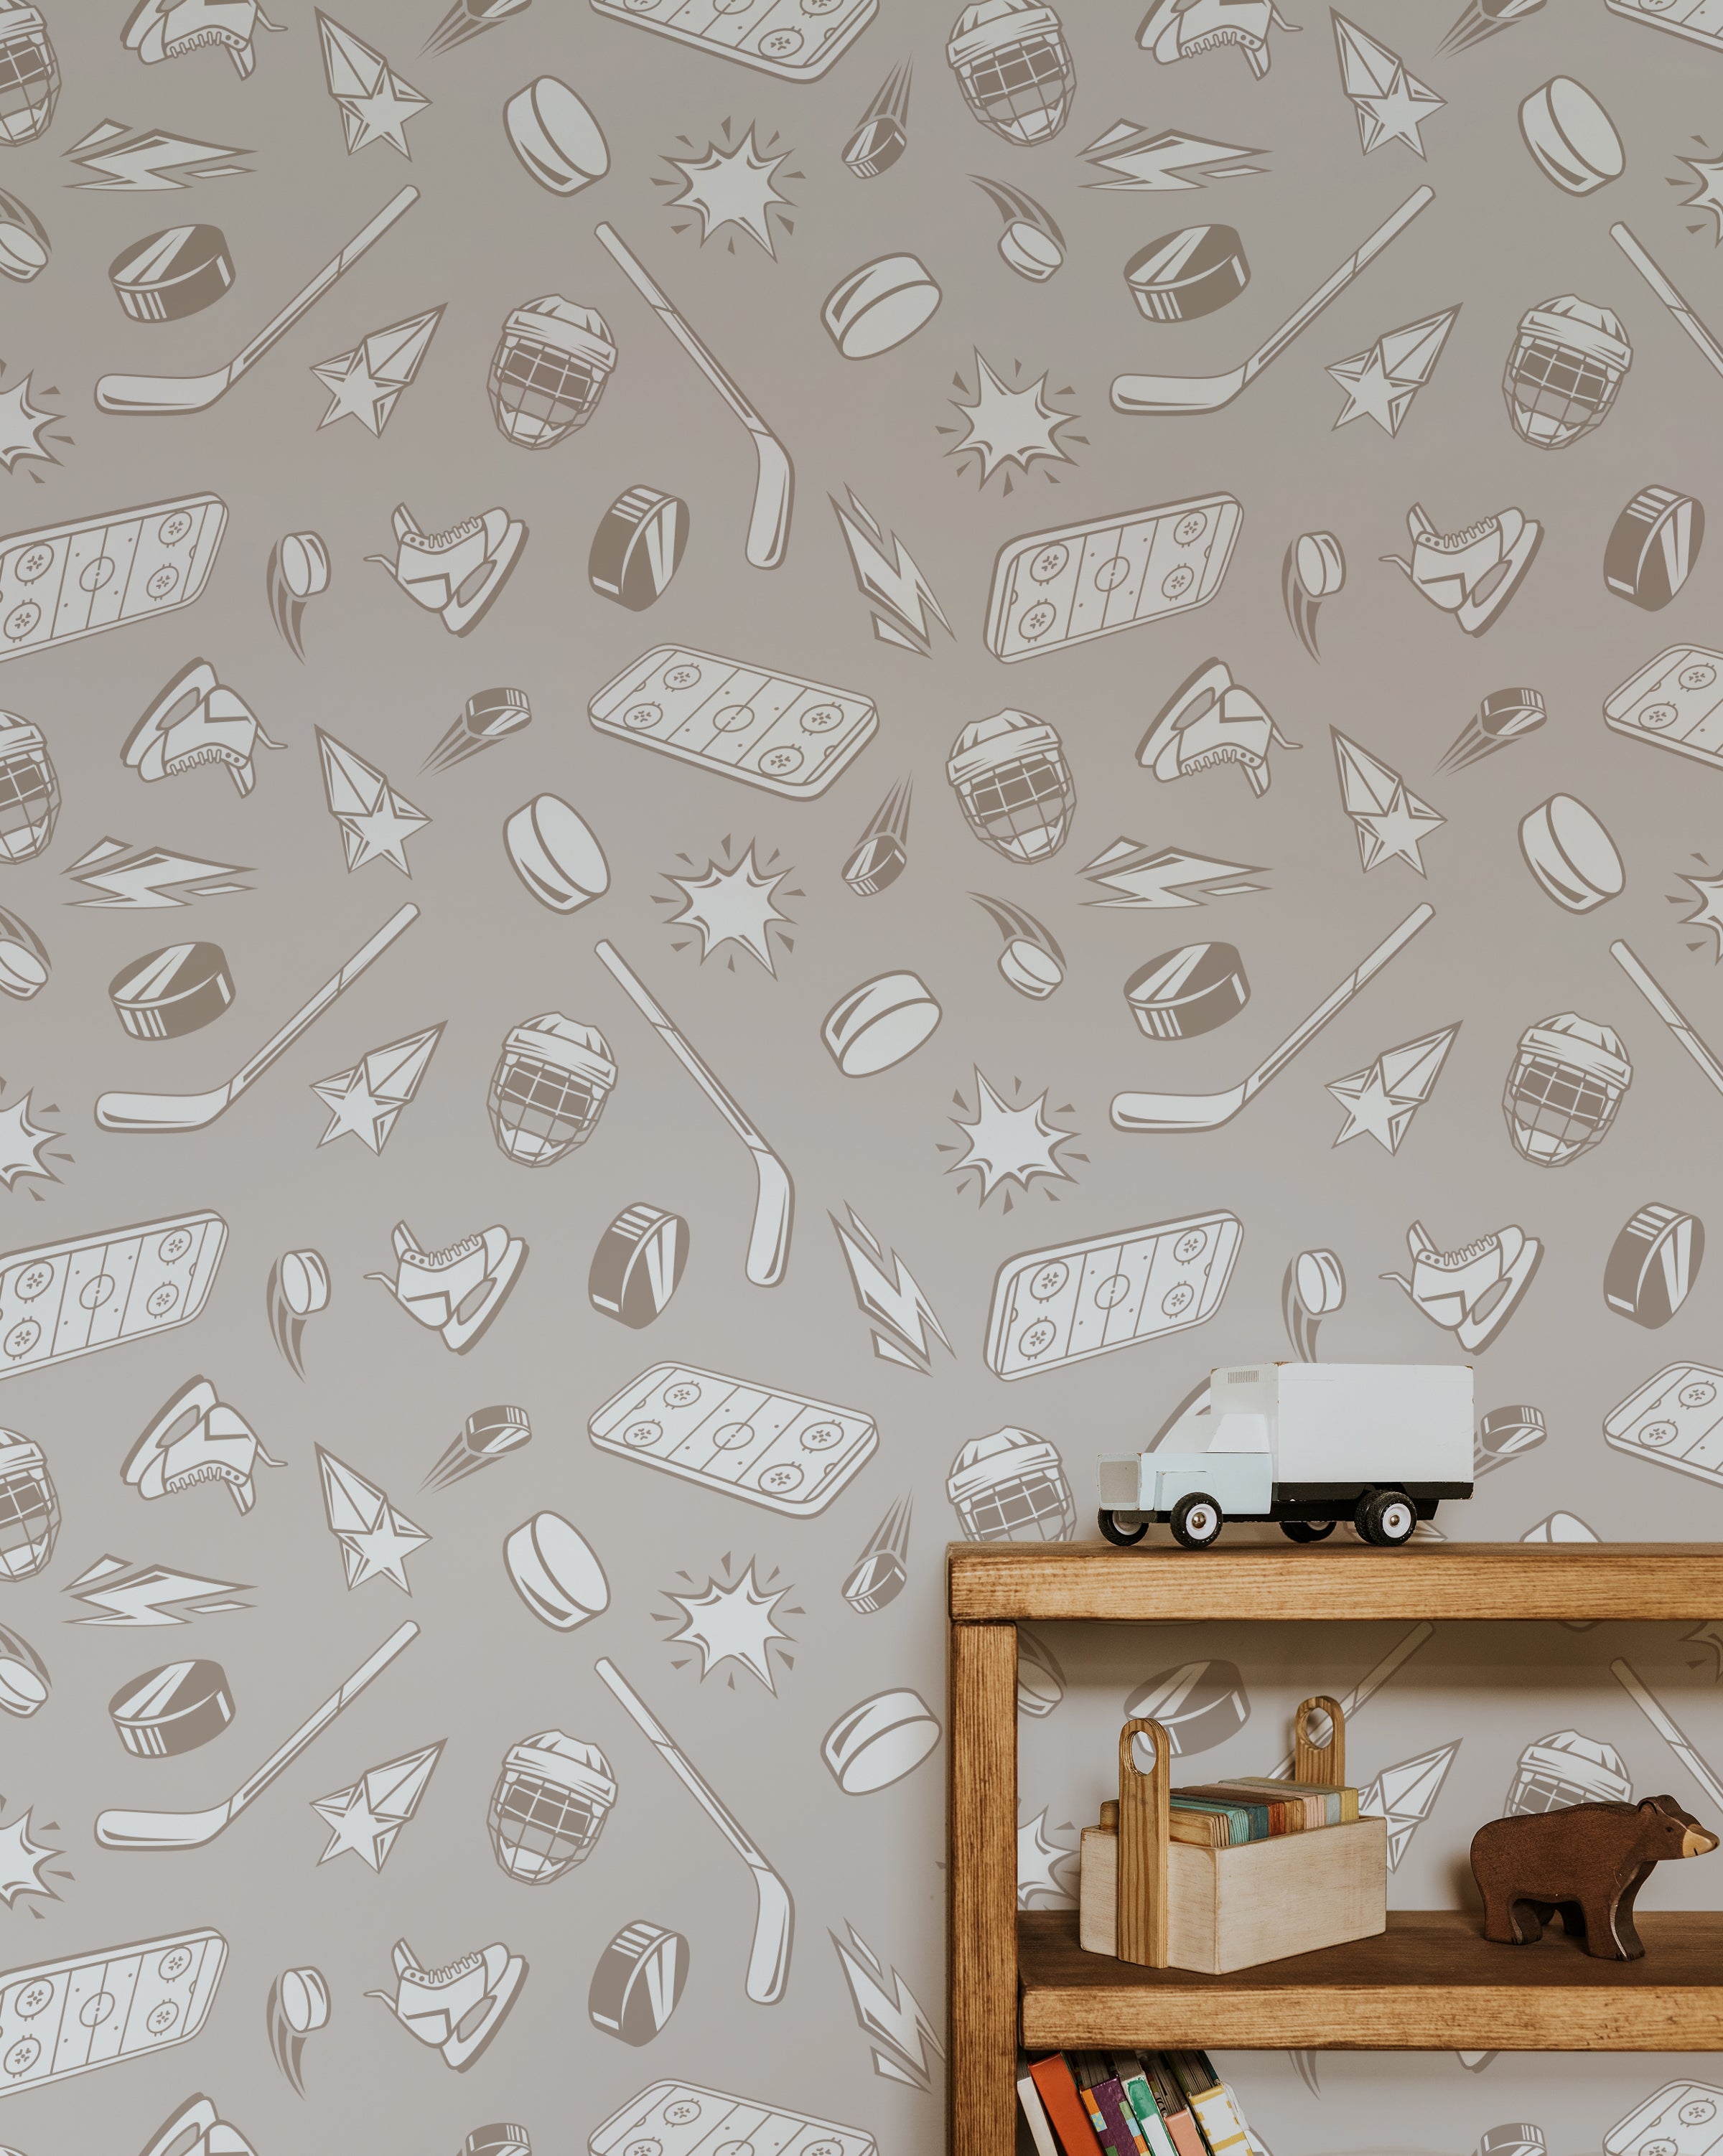 A wooden bookshelf with books and toys set against a wall covered in Ice Legend Wallpaper. The wallpaper features a playful pattern of hockey sticks, pucks, helmets, skates, and stars in beige tones.